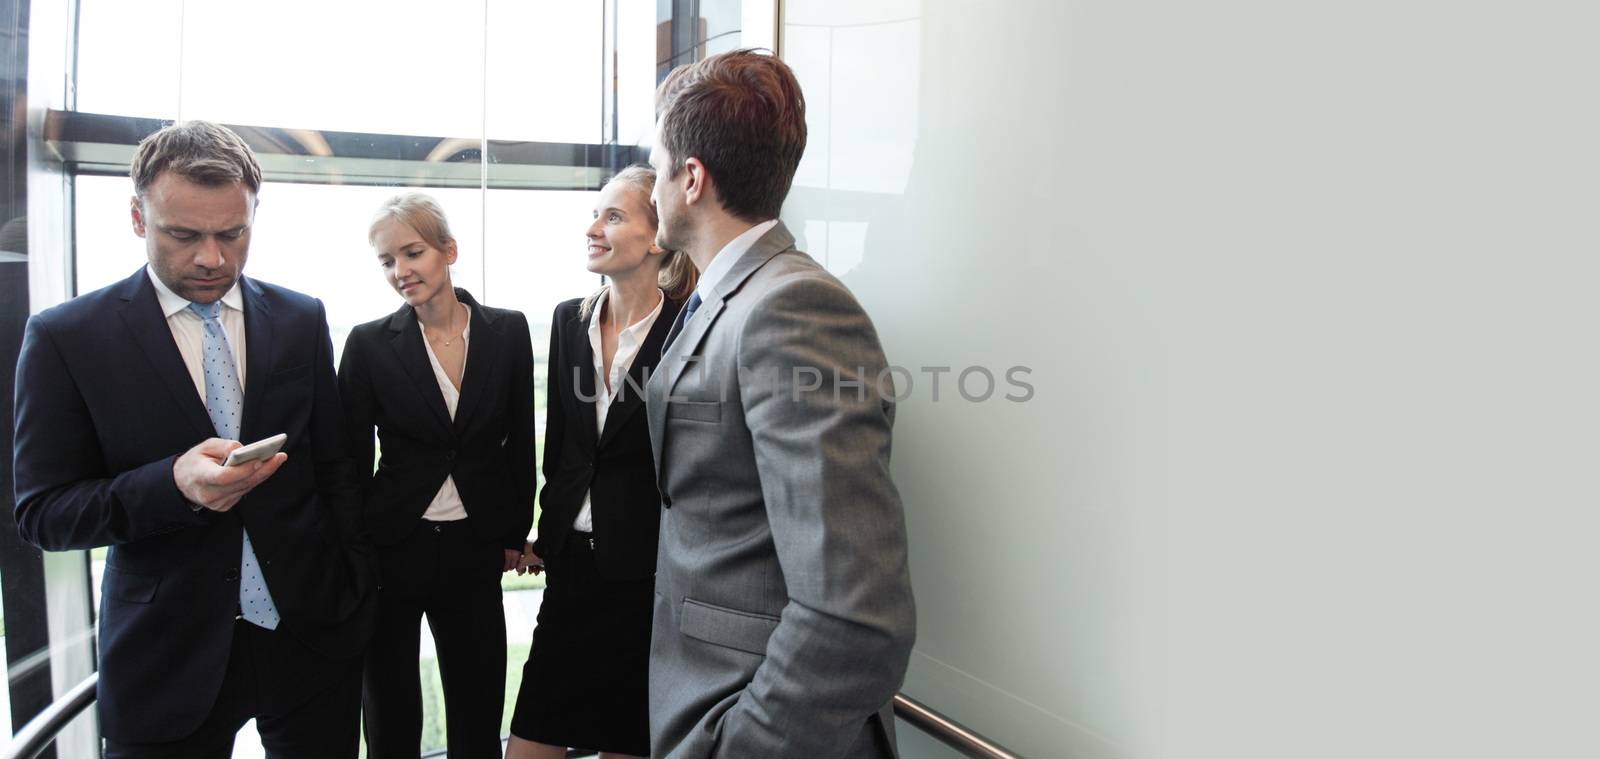 Business team group going on elevator by ALotOfPeople